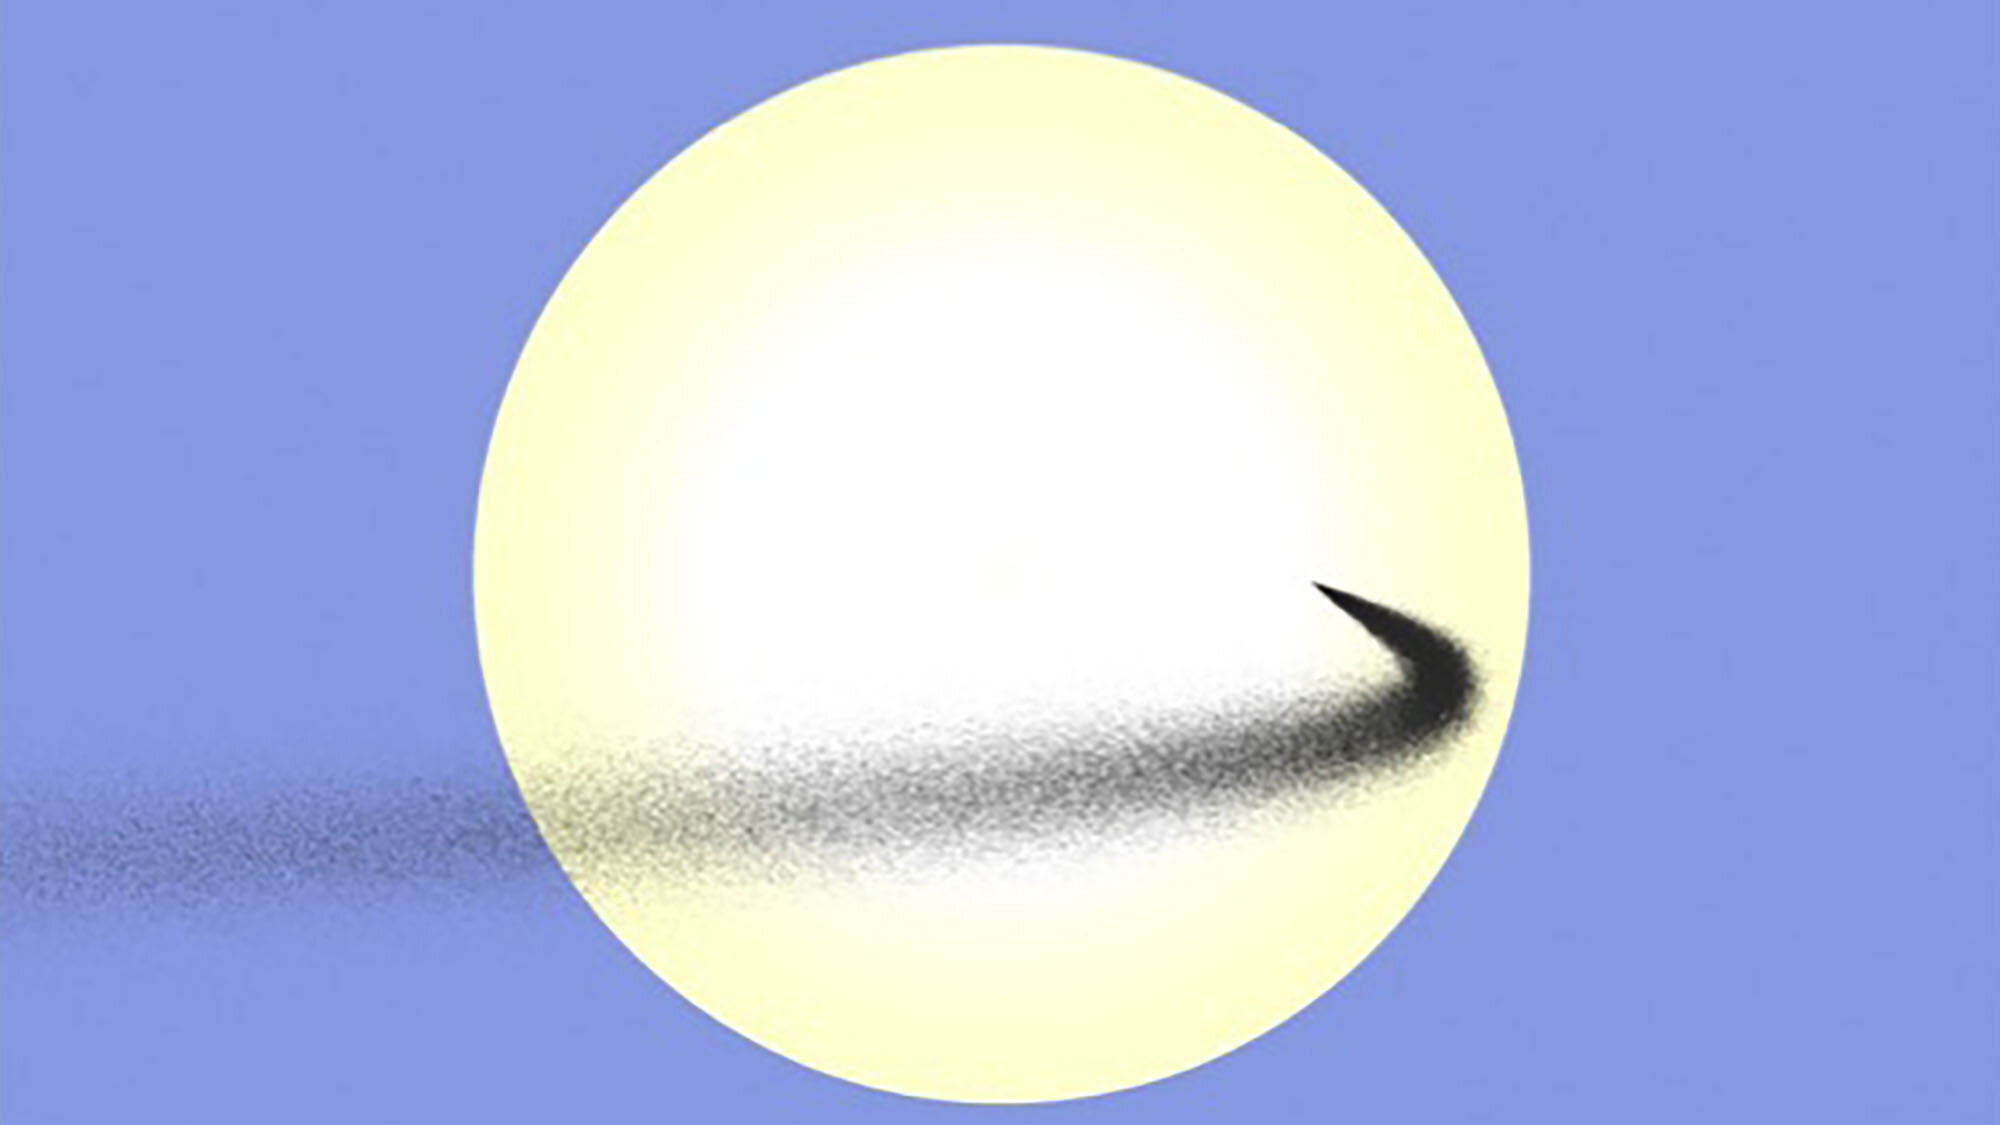 Simulated stream of dust launched between Earth and the Sun. This dust cloud is shown as it crosses the disk of the Sun, viewed from Earth. Streams like this one, including those launched from the Moon’s surface, can act as a temporary sunshade. CREDIT Credit: Ben Bromley/University of Utah